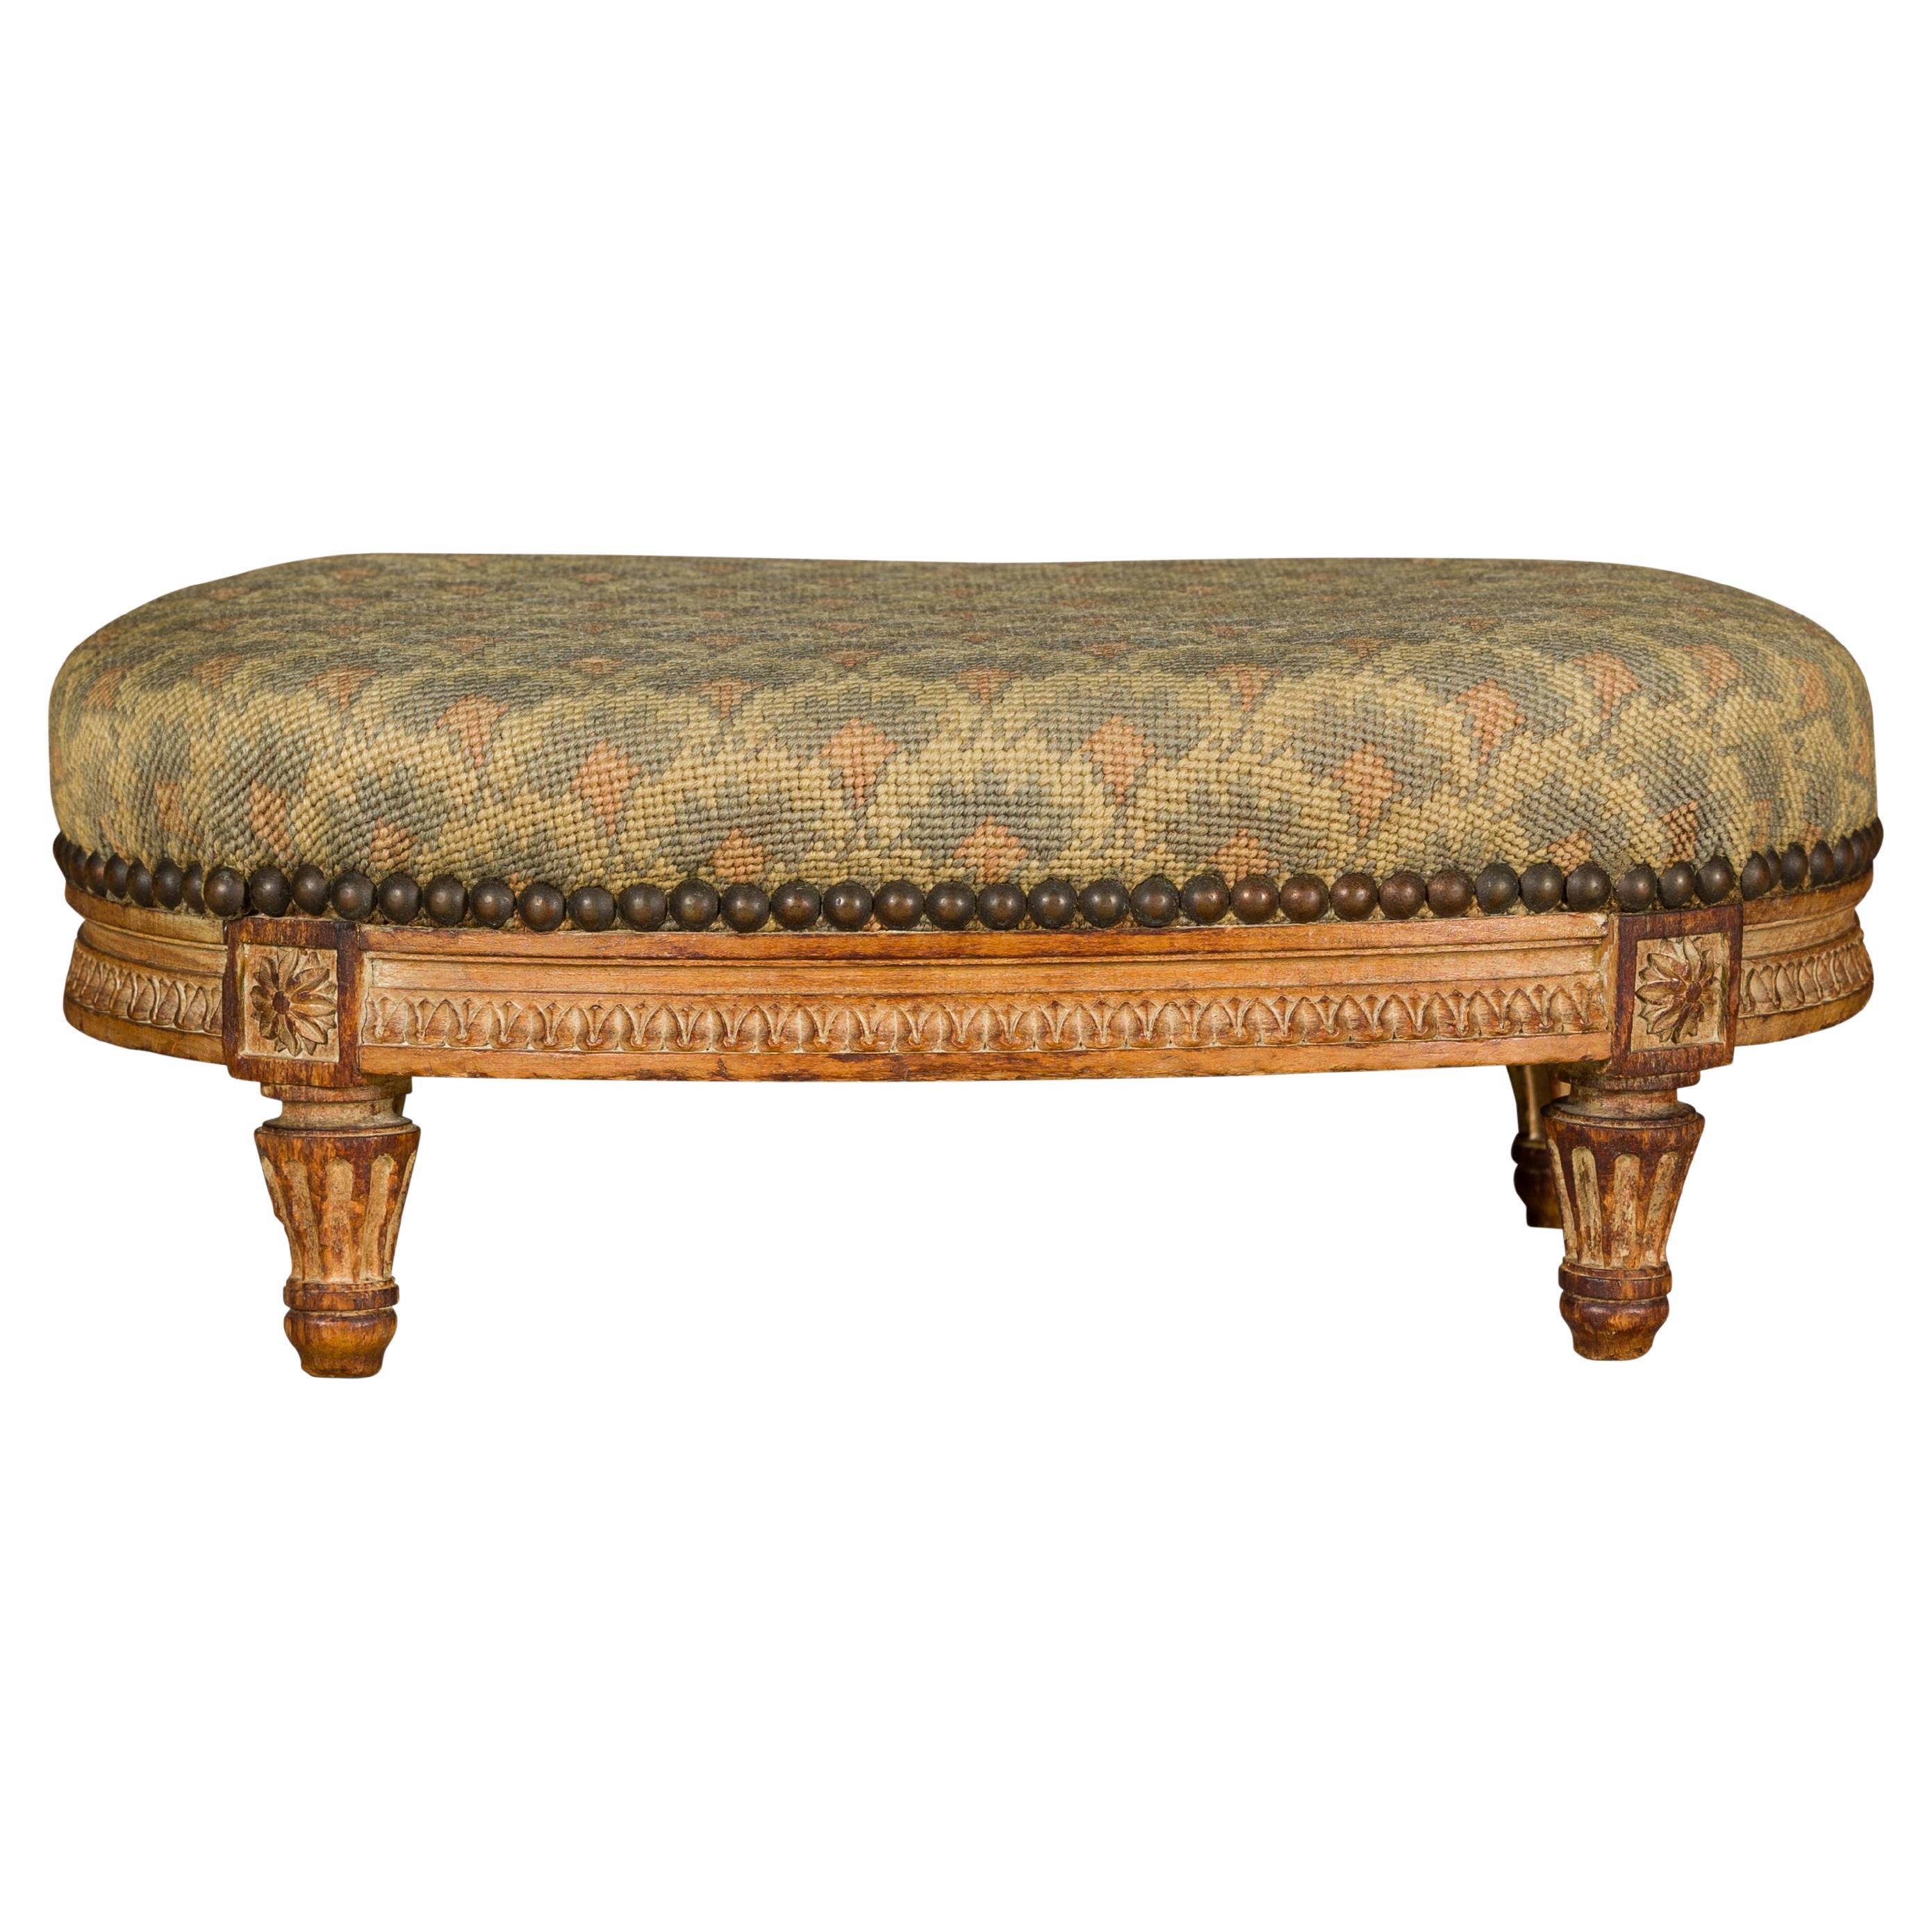 Louis XVI Style 19th Century French Stamped Pihouée Footstool with Carved Décor